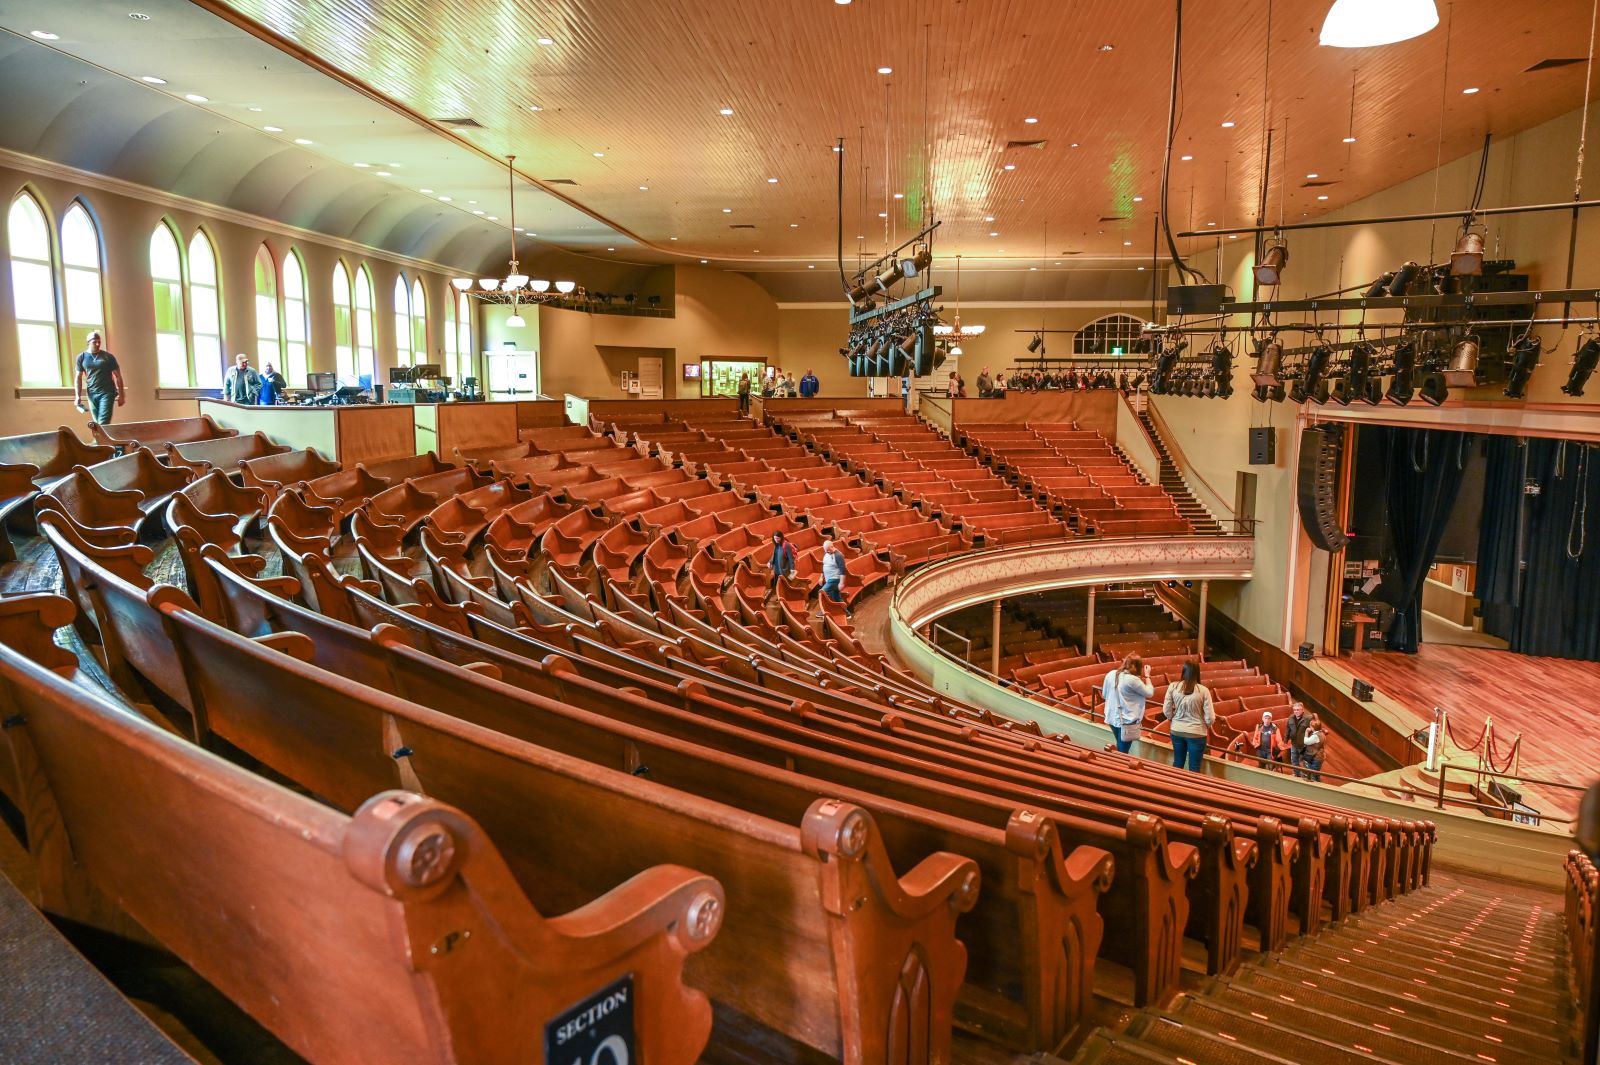 <p class="wp-caption-text">Image Credit: Shutterstock / Rolf_52</p>  <p>Step back in time at the Ryman Auditorium, the former home of the Grand Ole Opry. Take a guided tour to learn about the venue’s storied past and see where music legends like Johnny Cash and Dolly Parton once performed.</p>